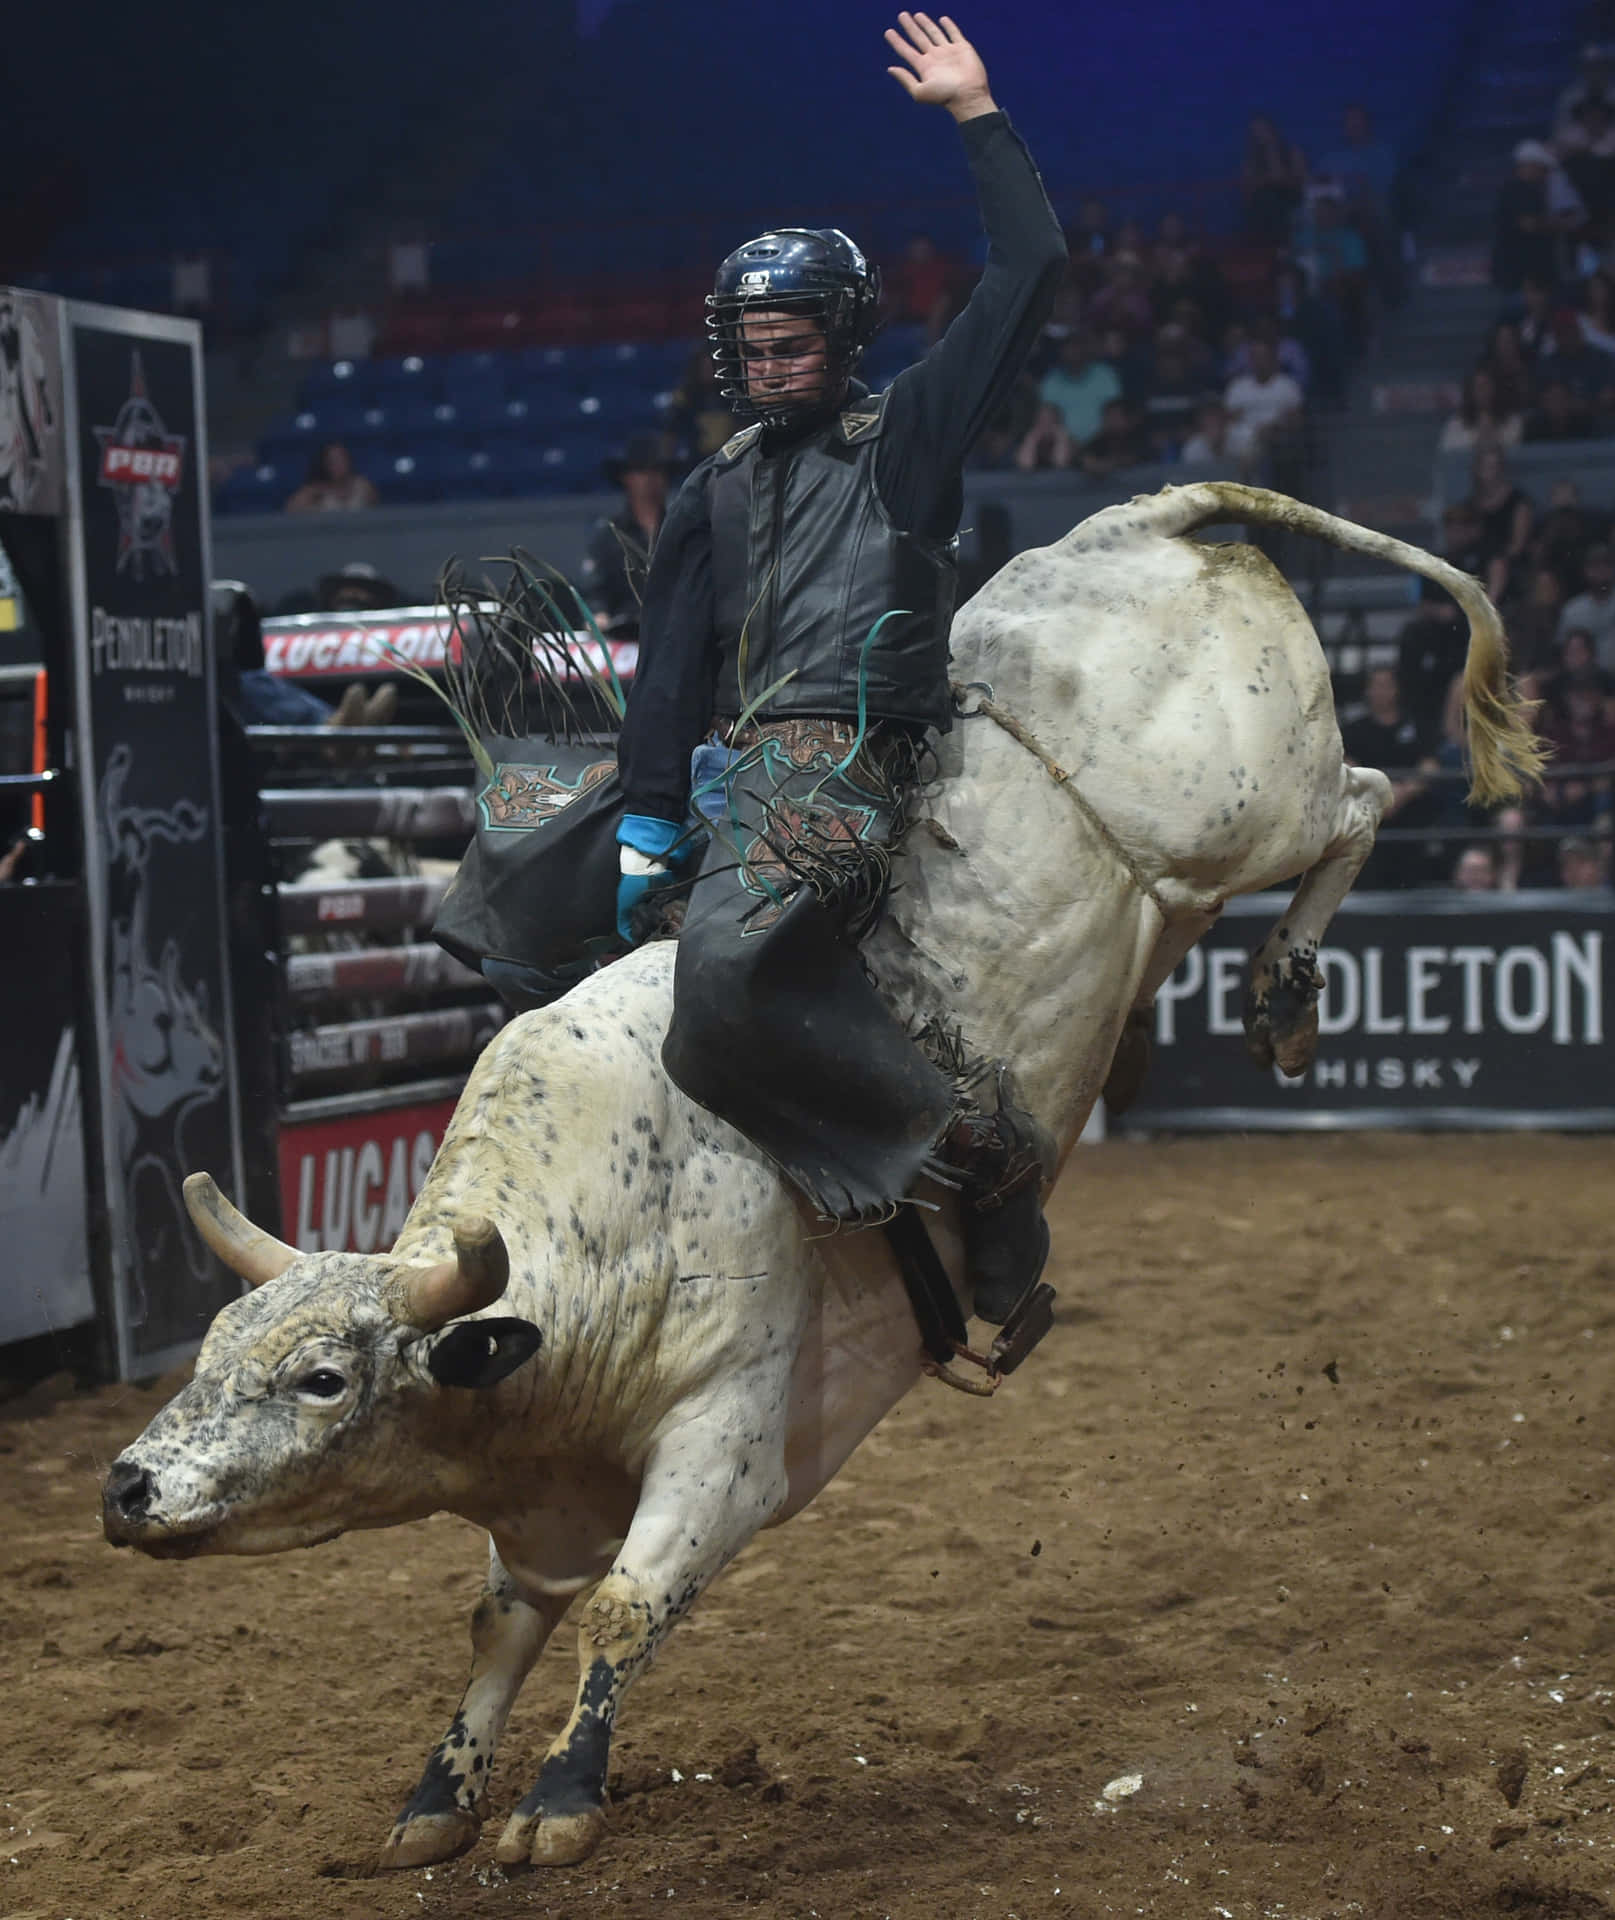 "Cowboy Launches Into Action During Bull Riding Competition"